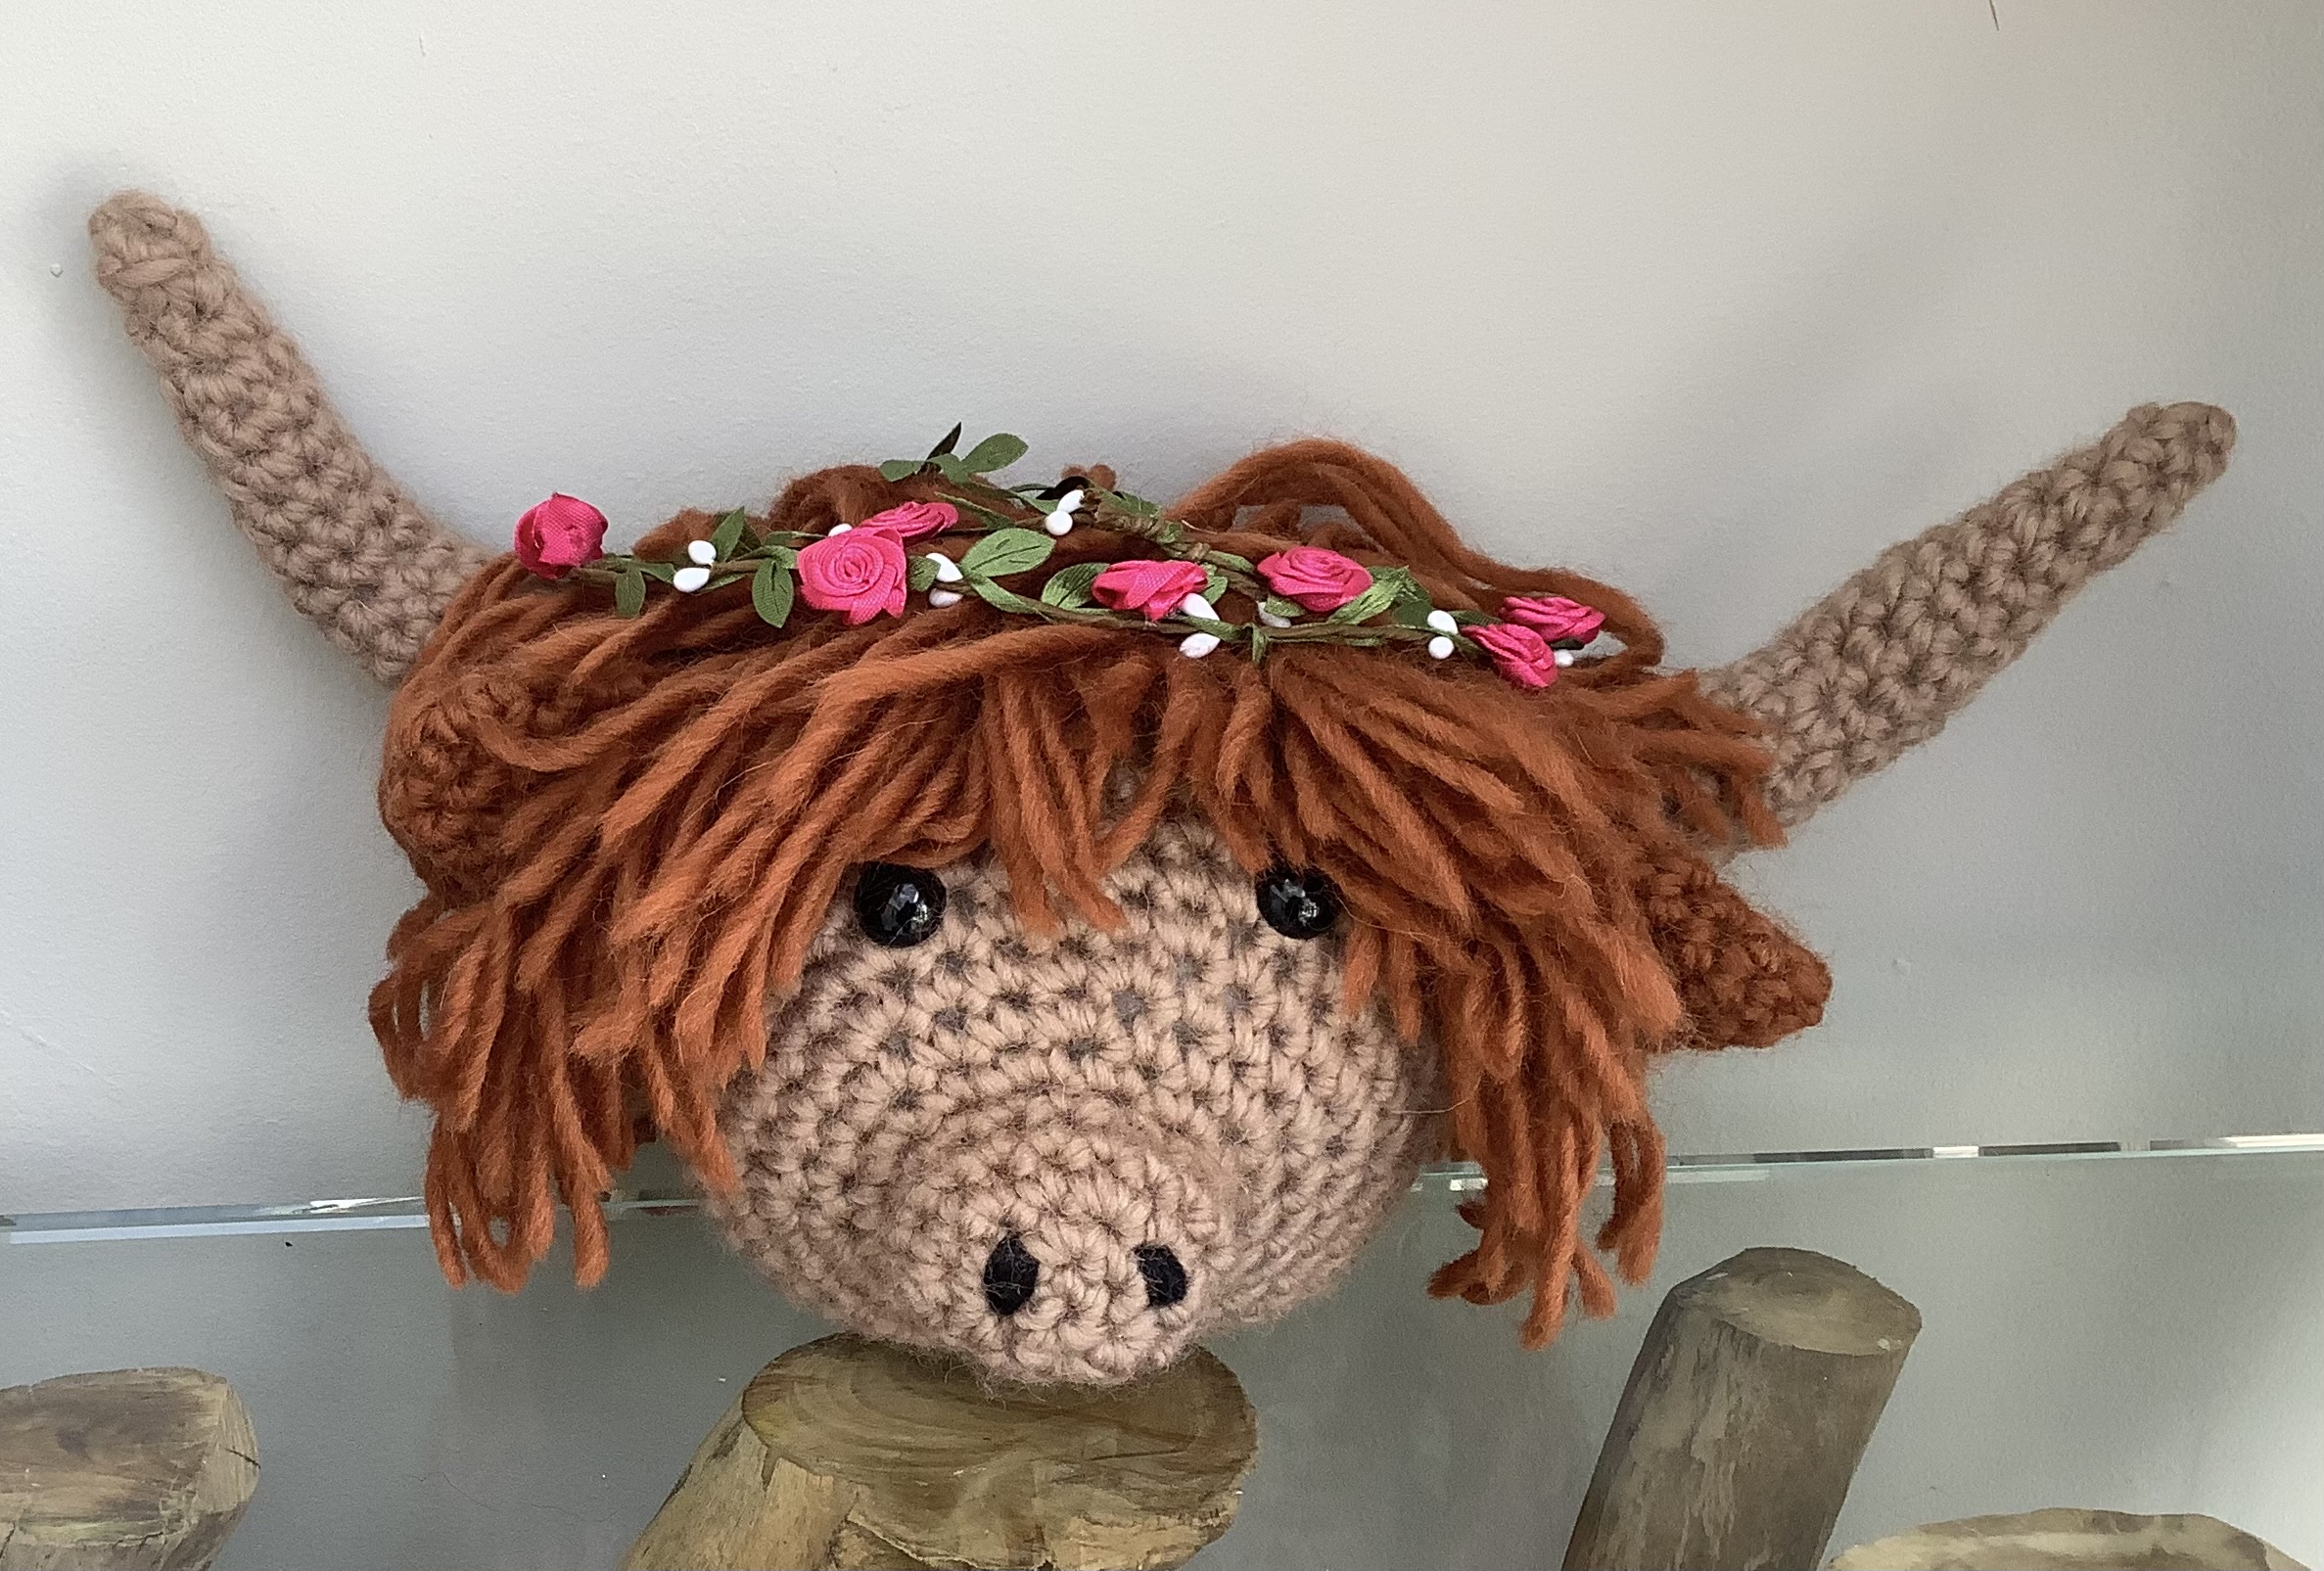 Hilda The Highland Cow Crochet Kit - Spotted Sheep